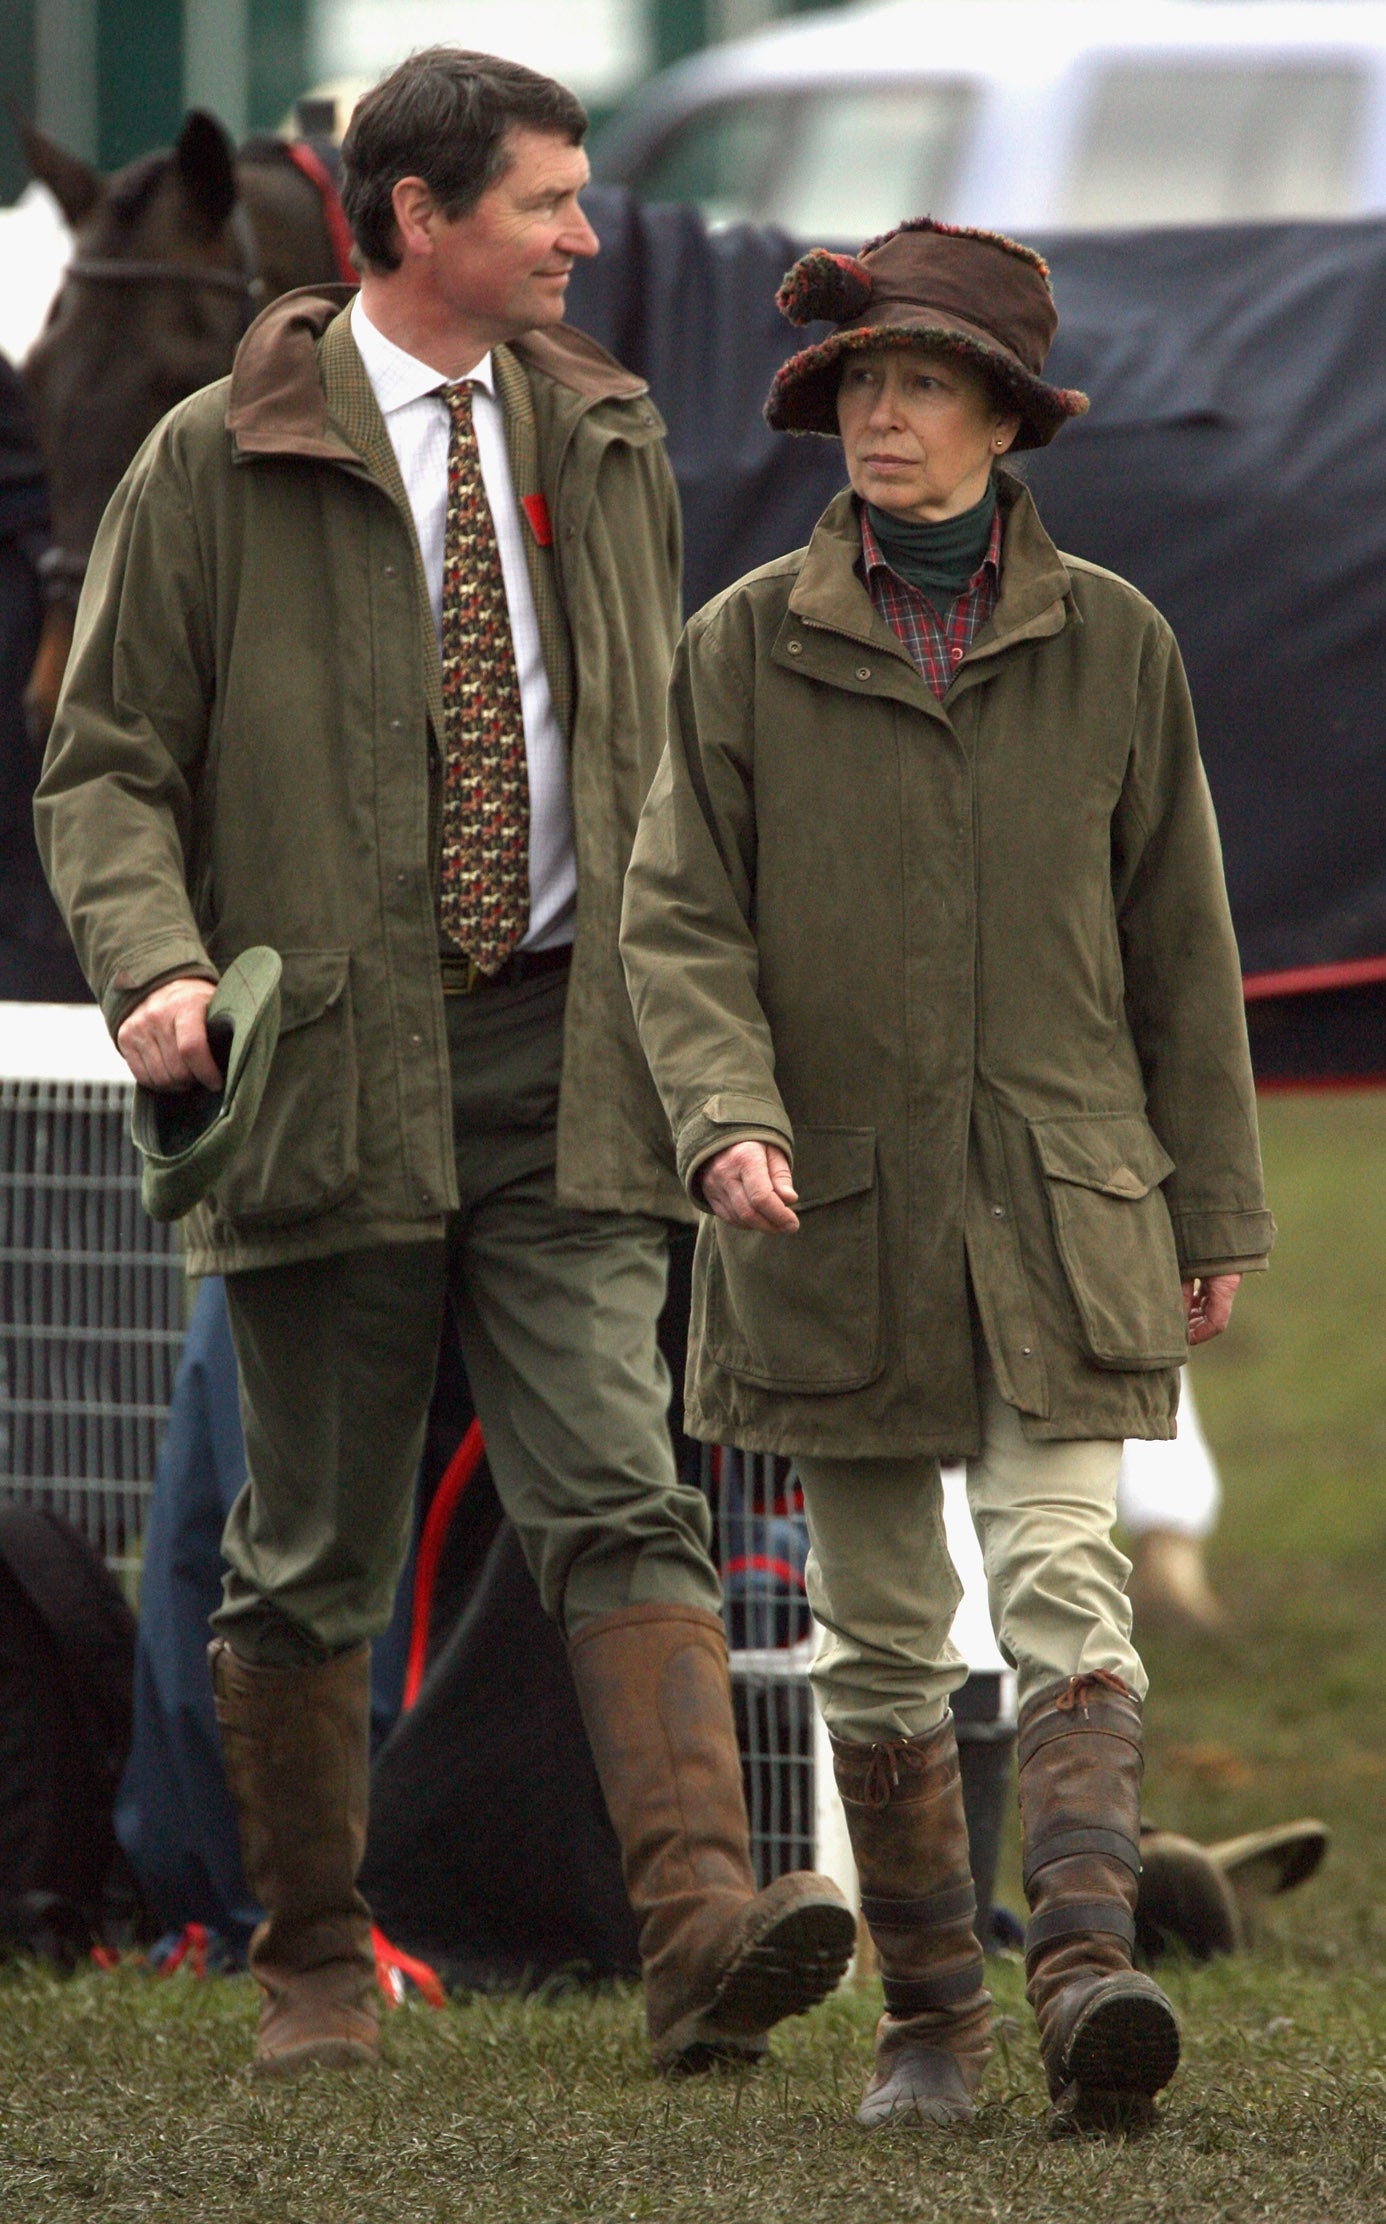 Princess Anne’s response to becoming a style icon was peak HRH